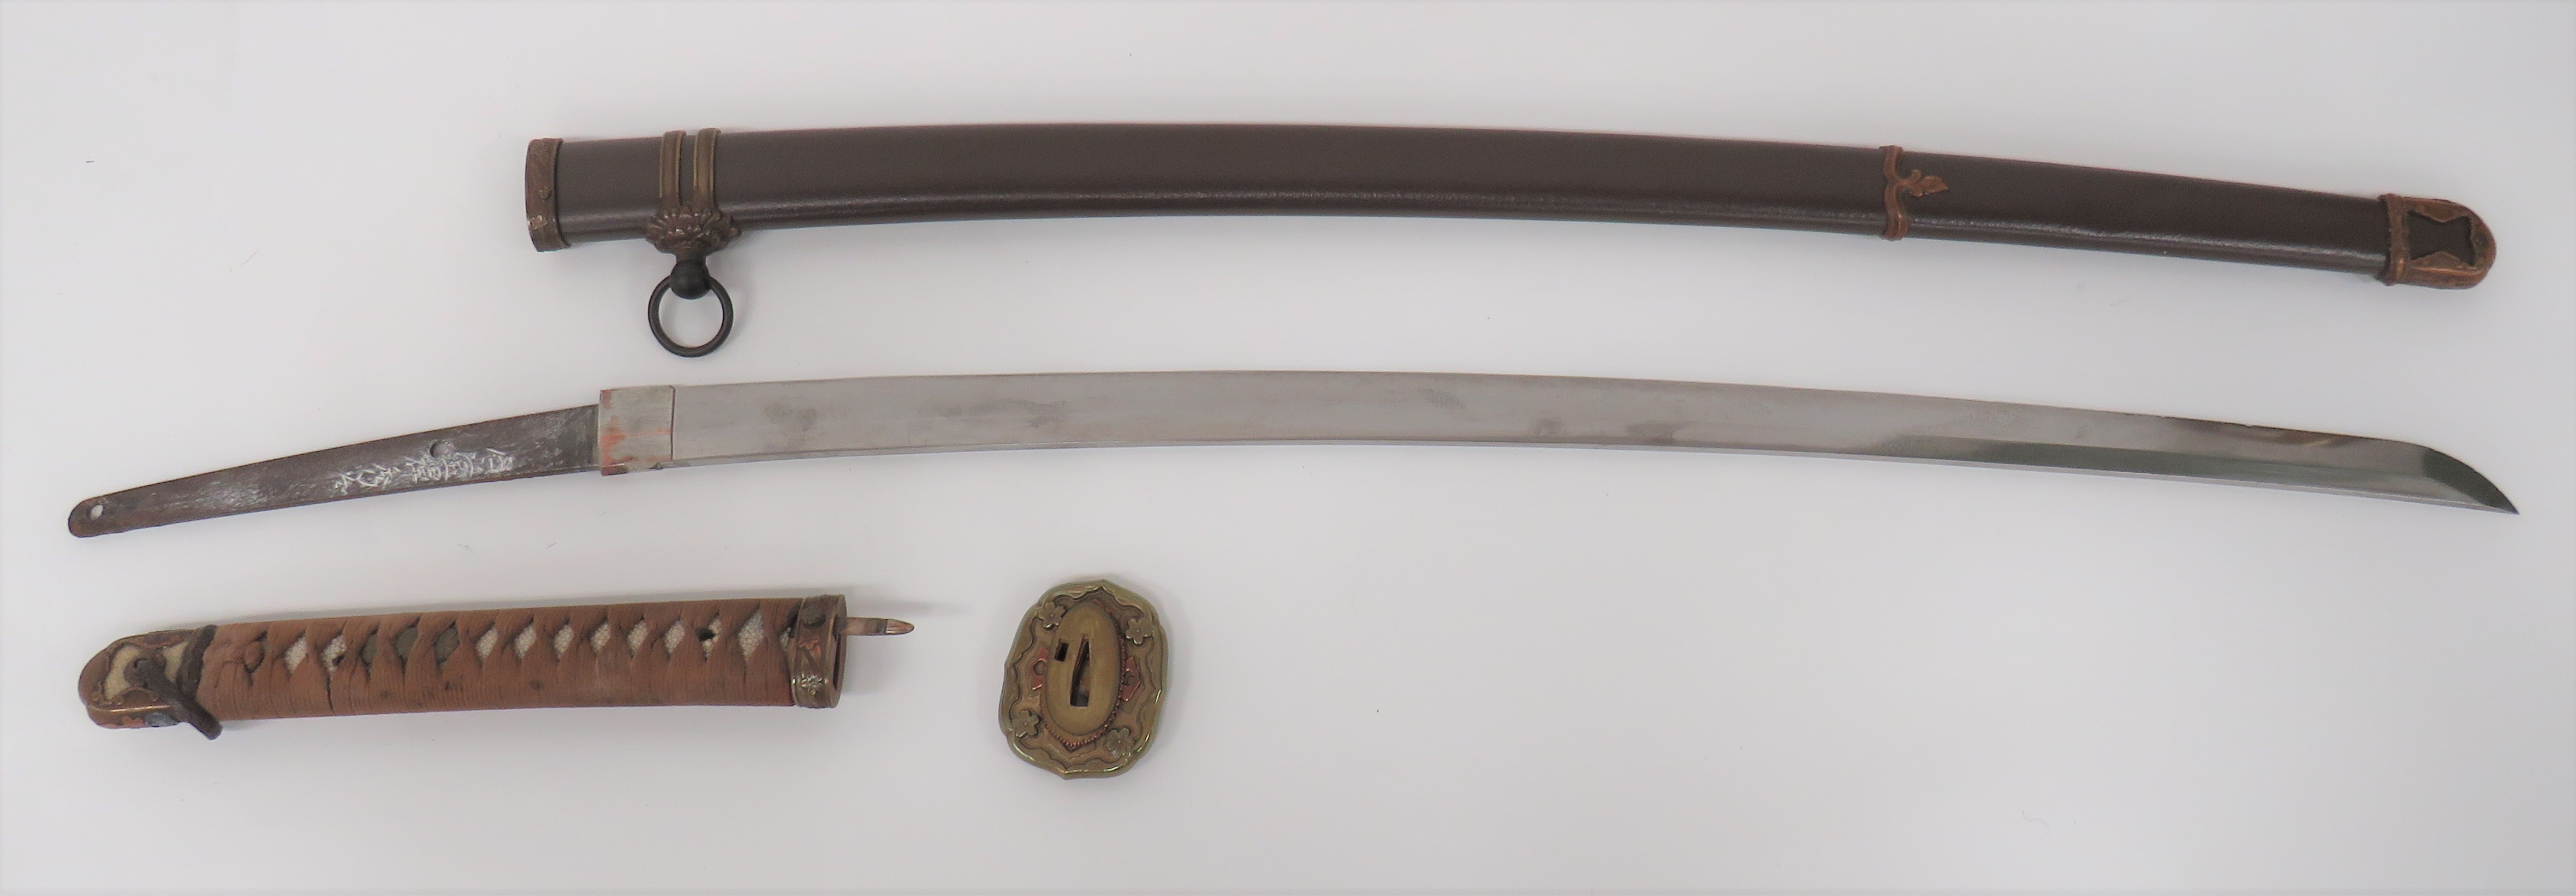 WW2 Military Mounted Japanese Officer's Katana Sword With Signed Tang 27 1/4 inch, single edged